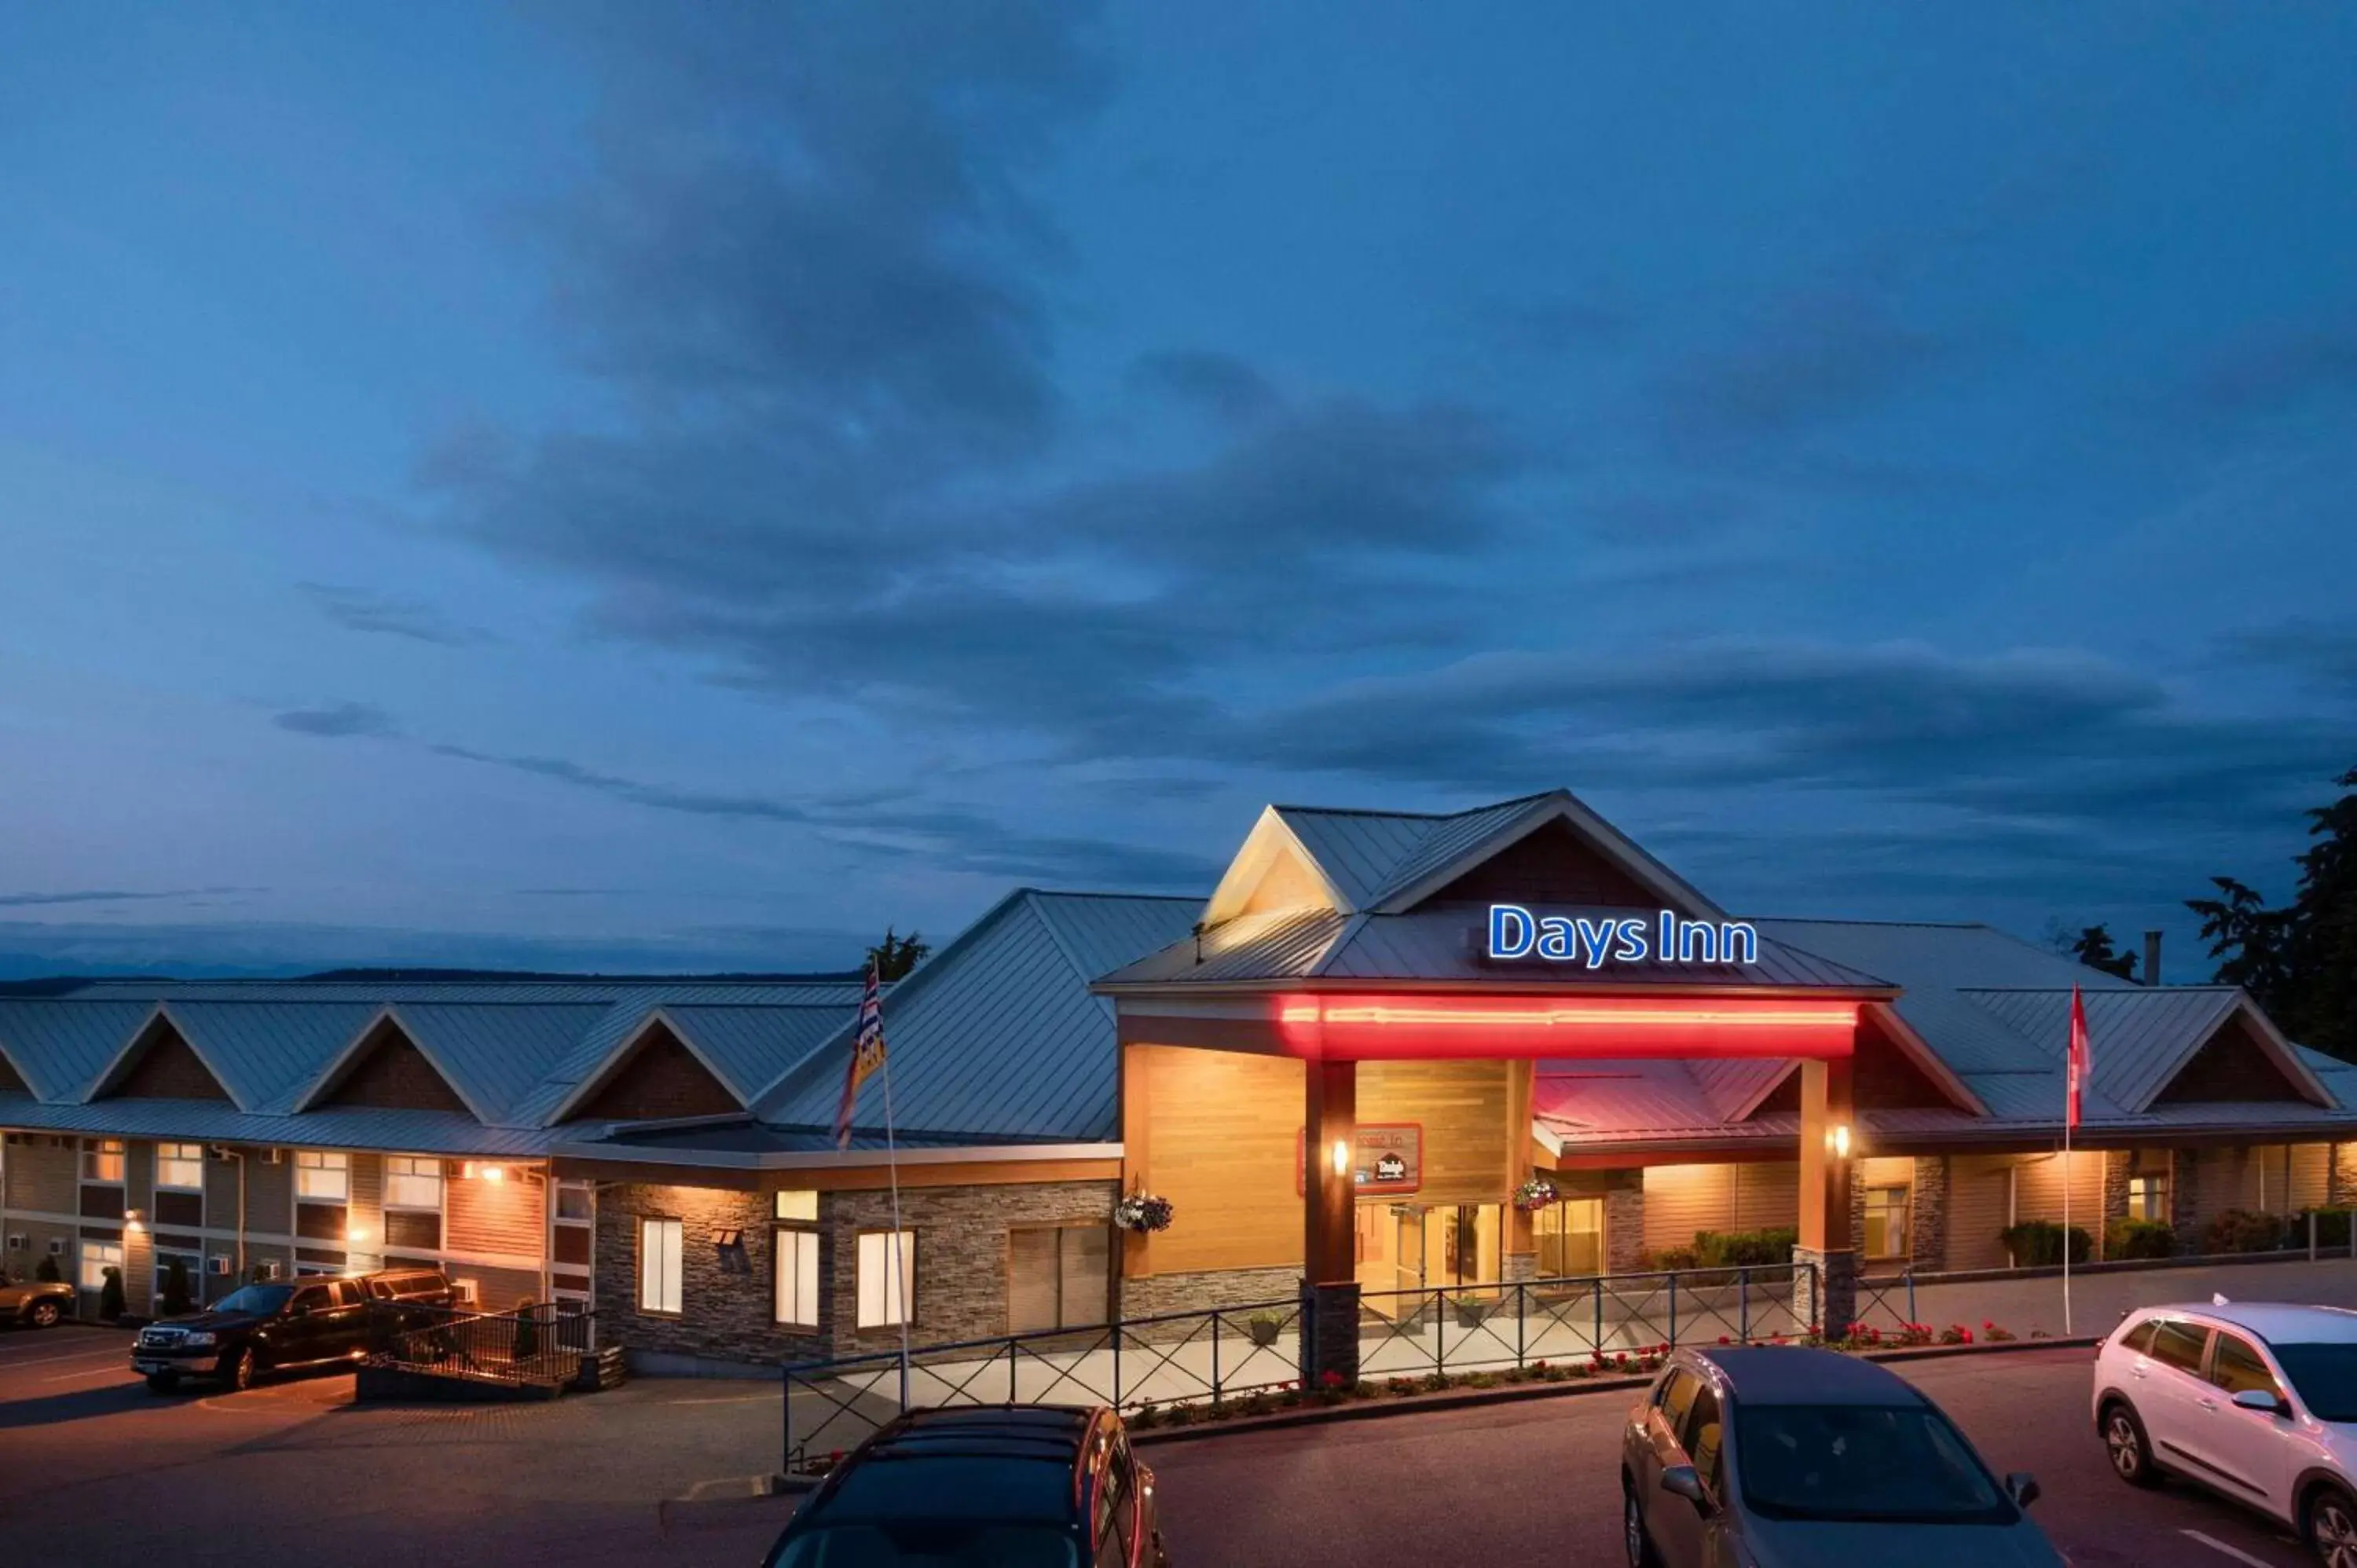 Property Building in Days Inn by Wyndham Nanaimo